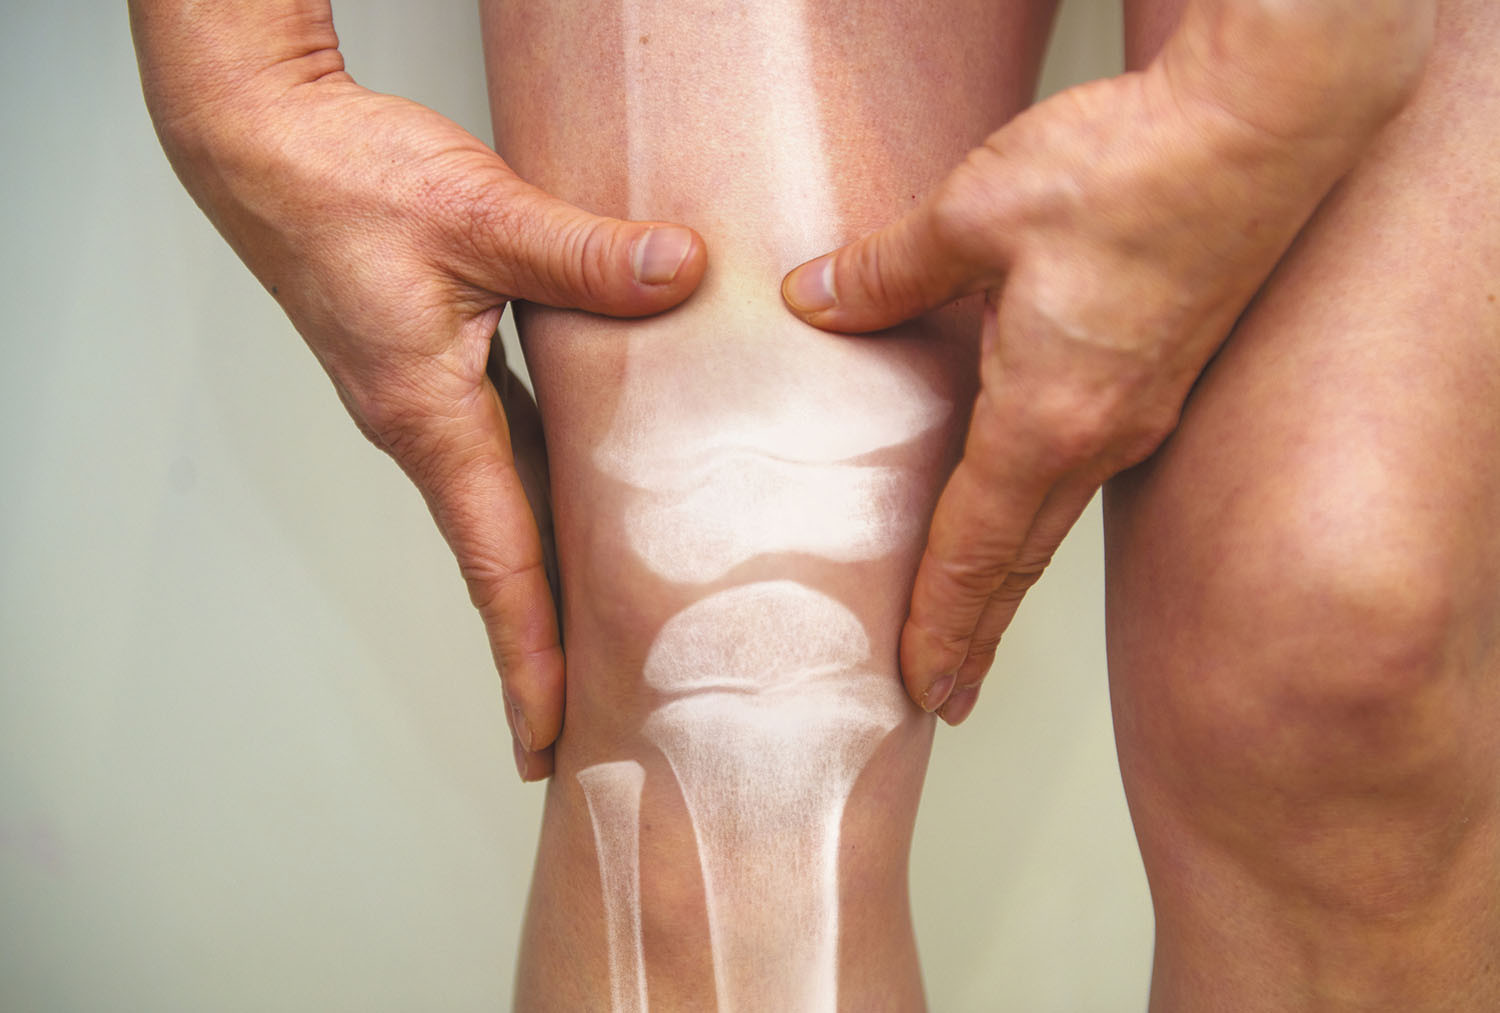 photo illustration of a man's leg showing the bones superimposed on the skin